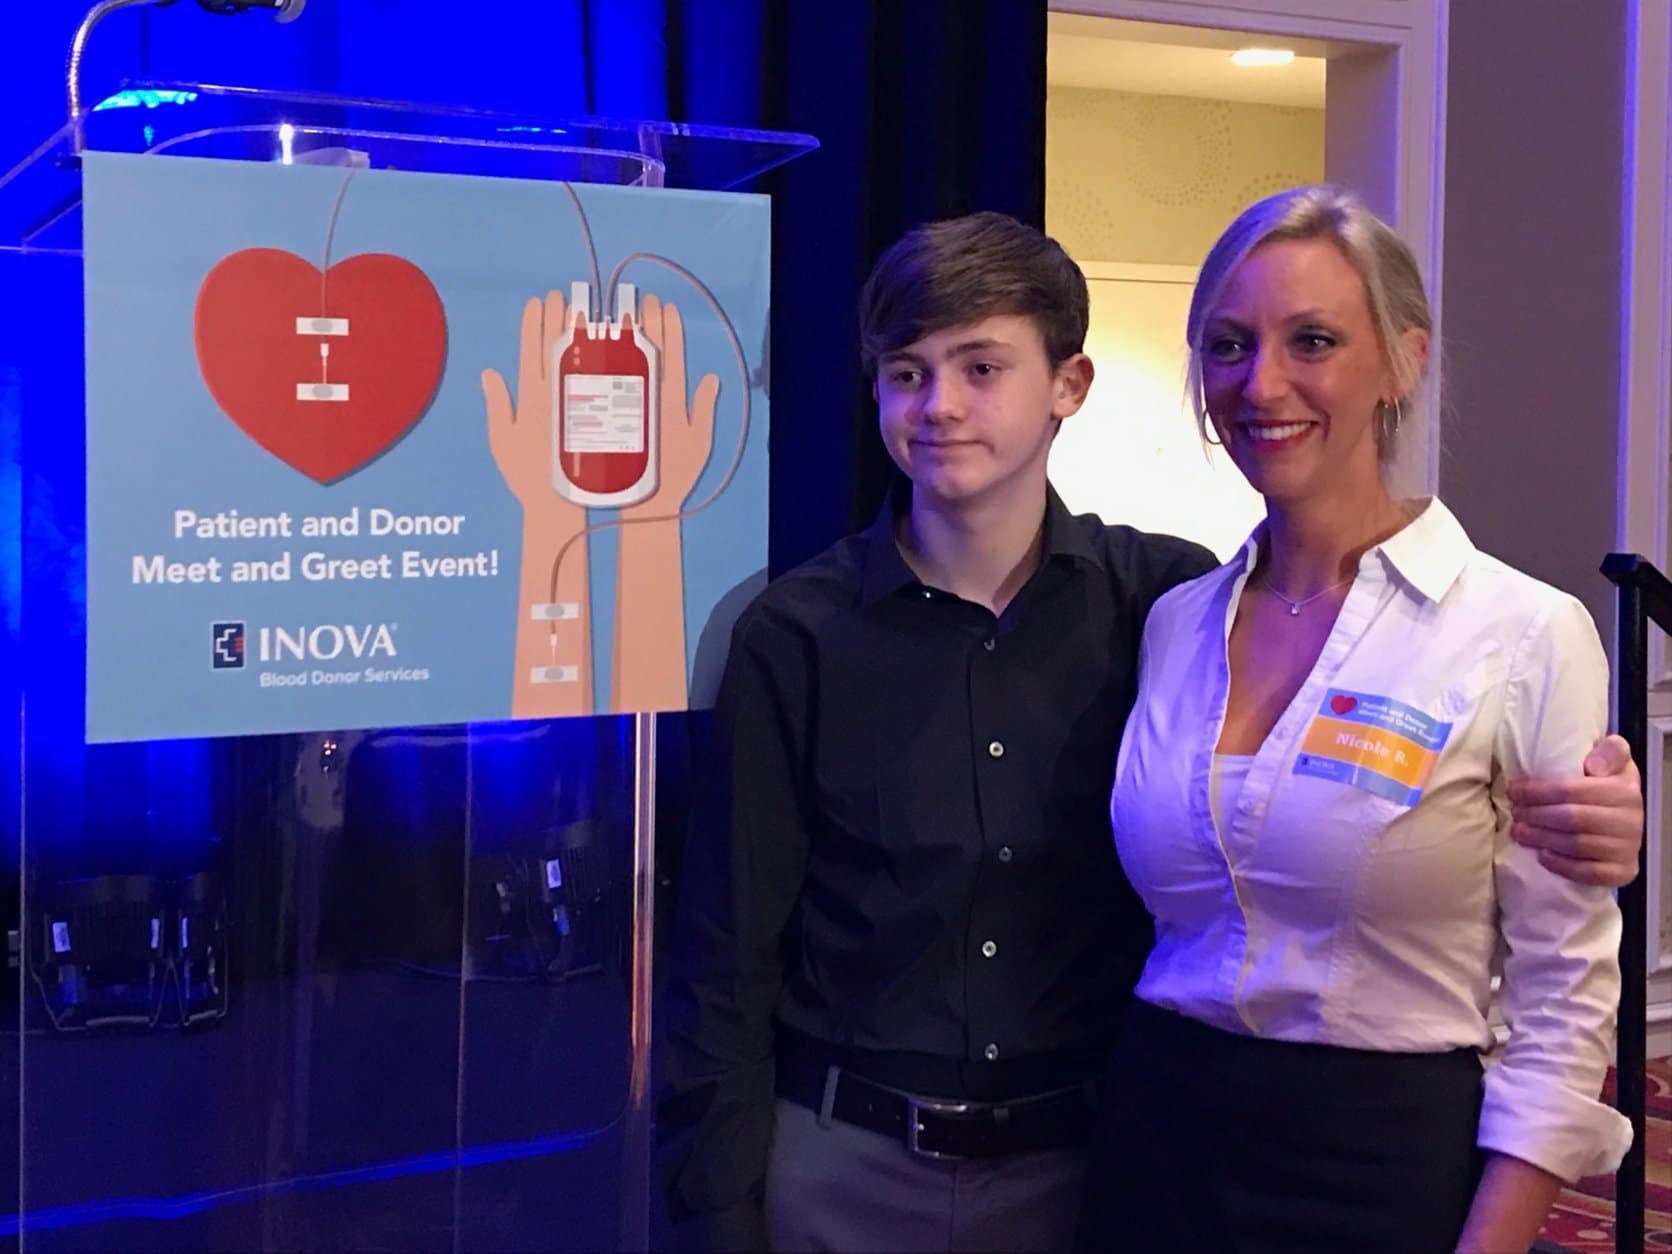 Tate Reynolds, 13, and his mother, Nicole Reynolds, meet some of the donors who helped save his life after he was accidentally stabbed in 2017. At the time, doctors weren't sure Tate Reynolds would survive. The donations from more than 80 people helped save him. (WTOP/Michelle Basch) 